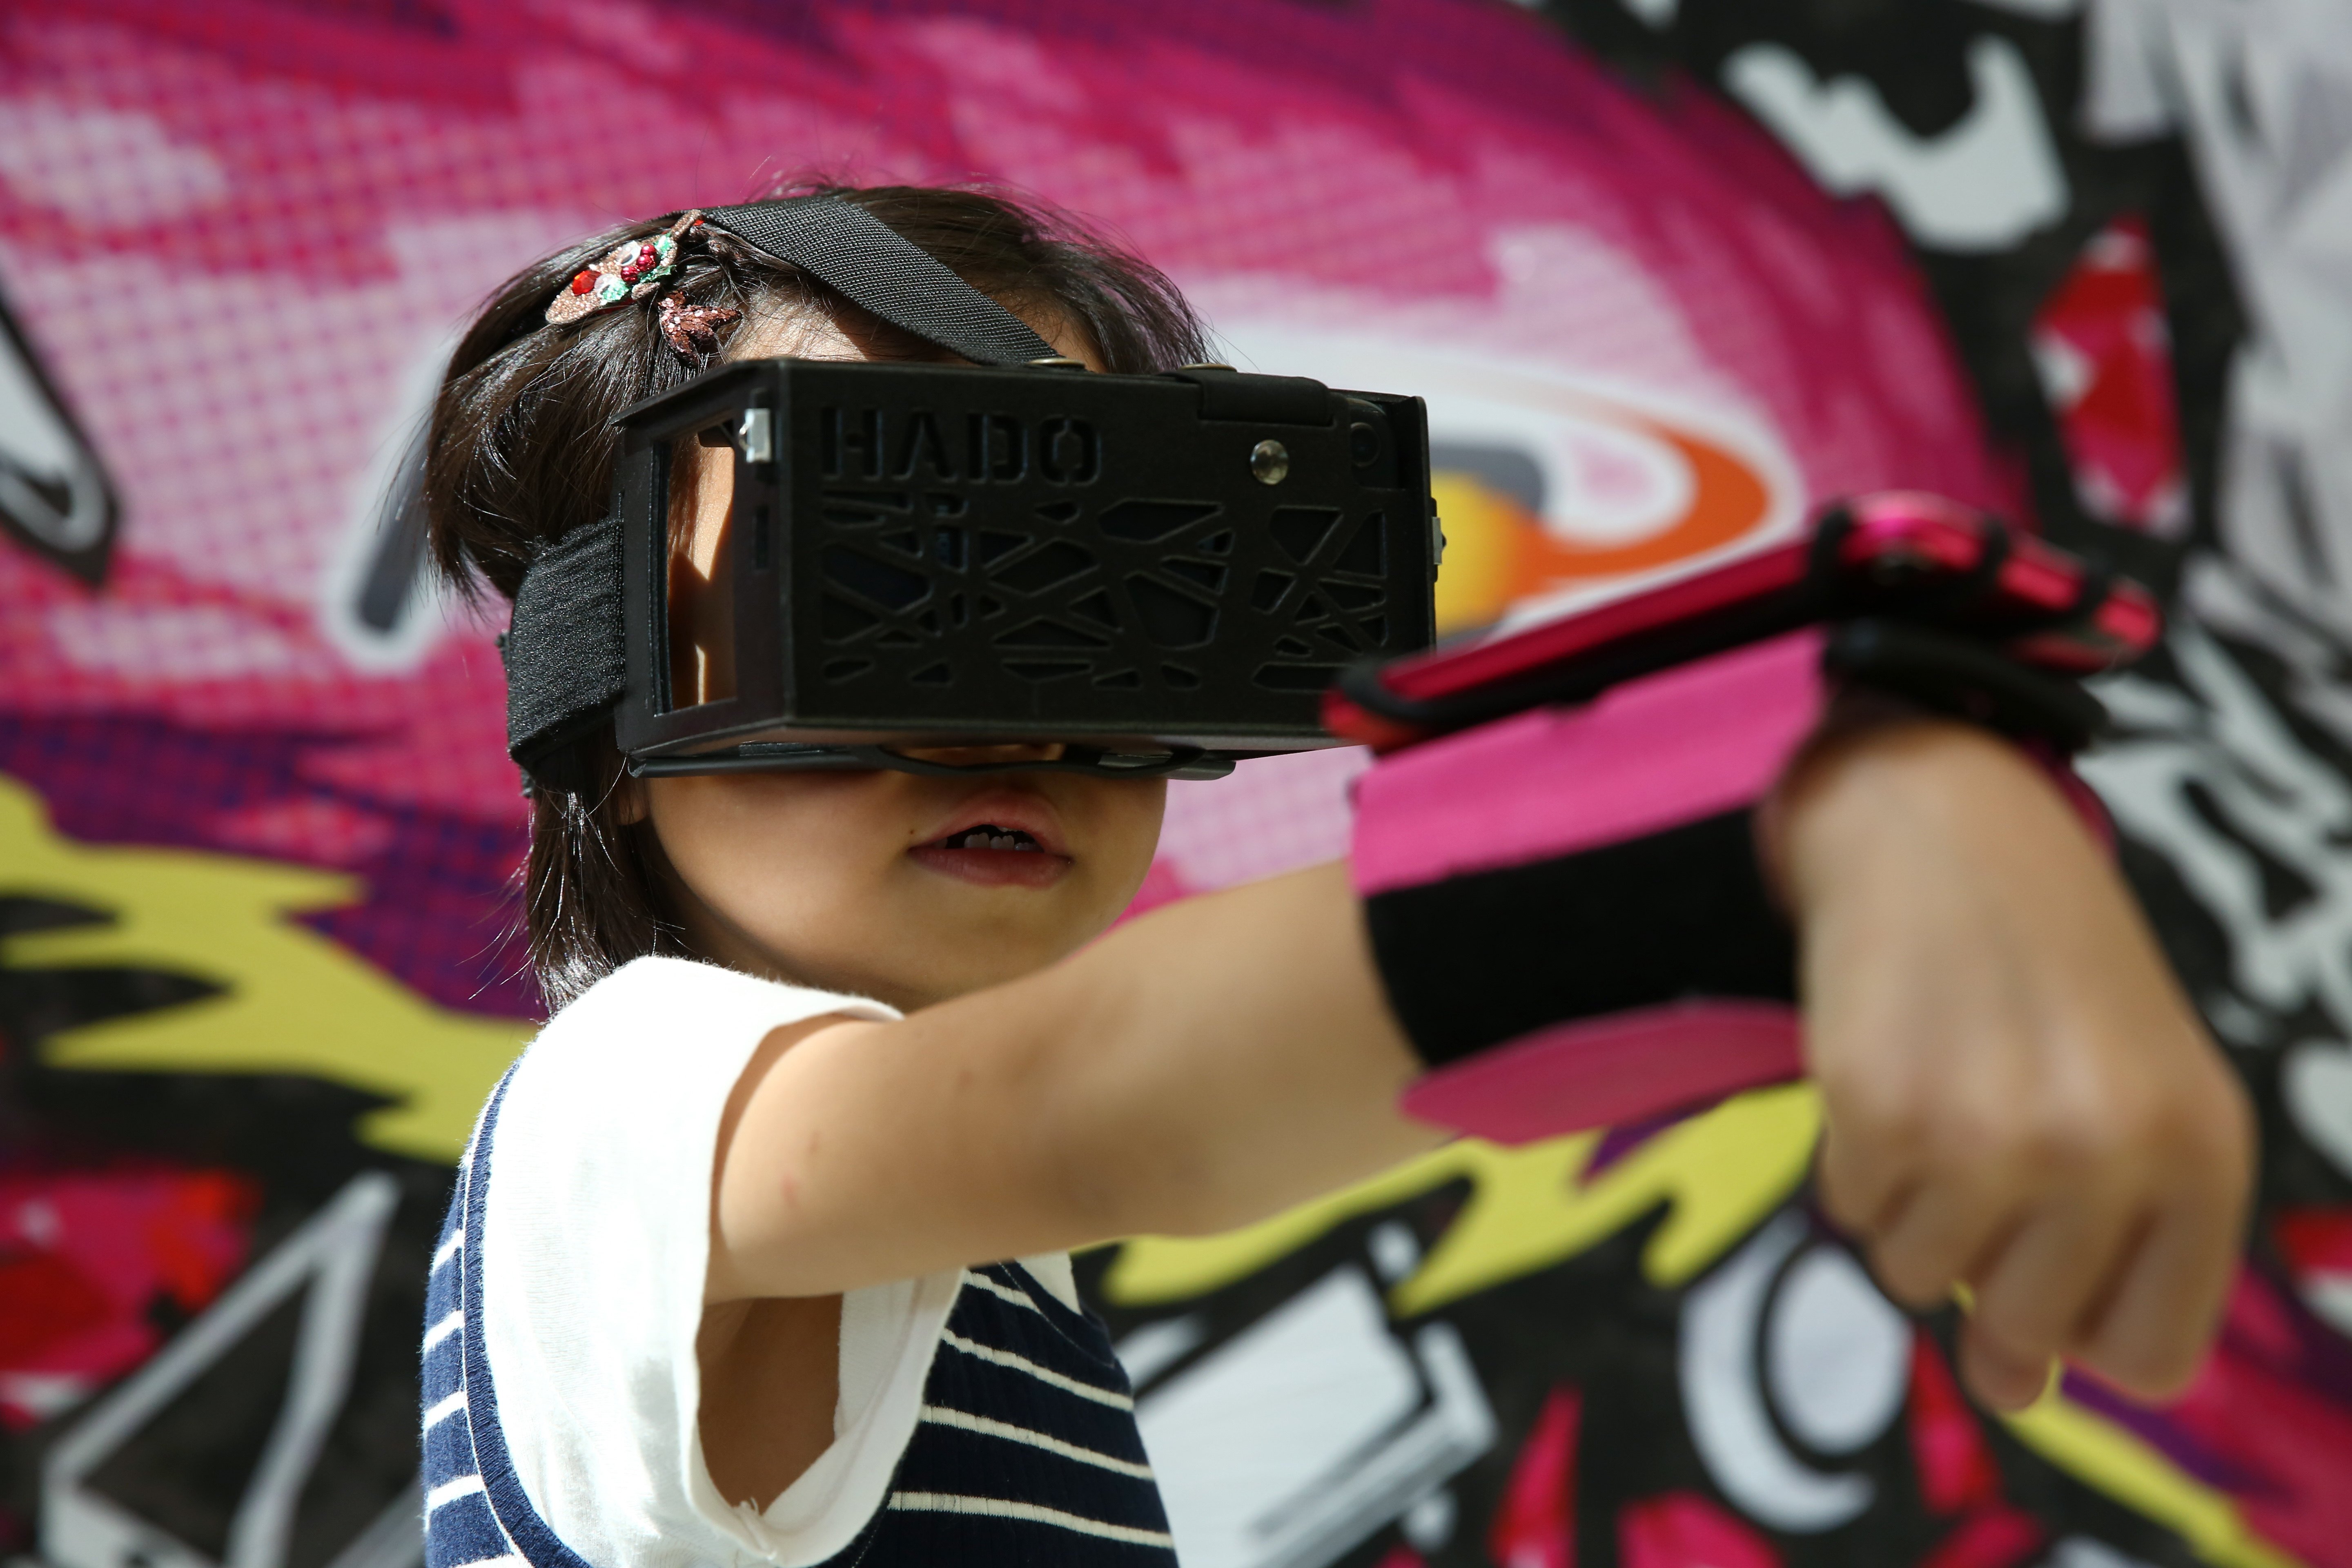 A girl plays a video game at an e-sports carnival at Cyberport in September 2018. Hong Kong’s tech hubs have an important role to play in fostering content technology. Photo: Edmond So